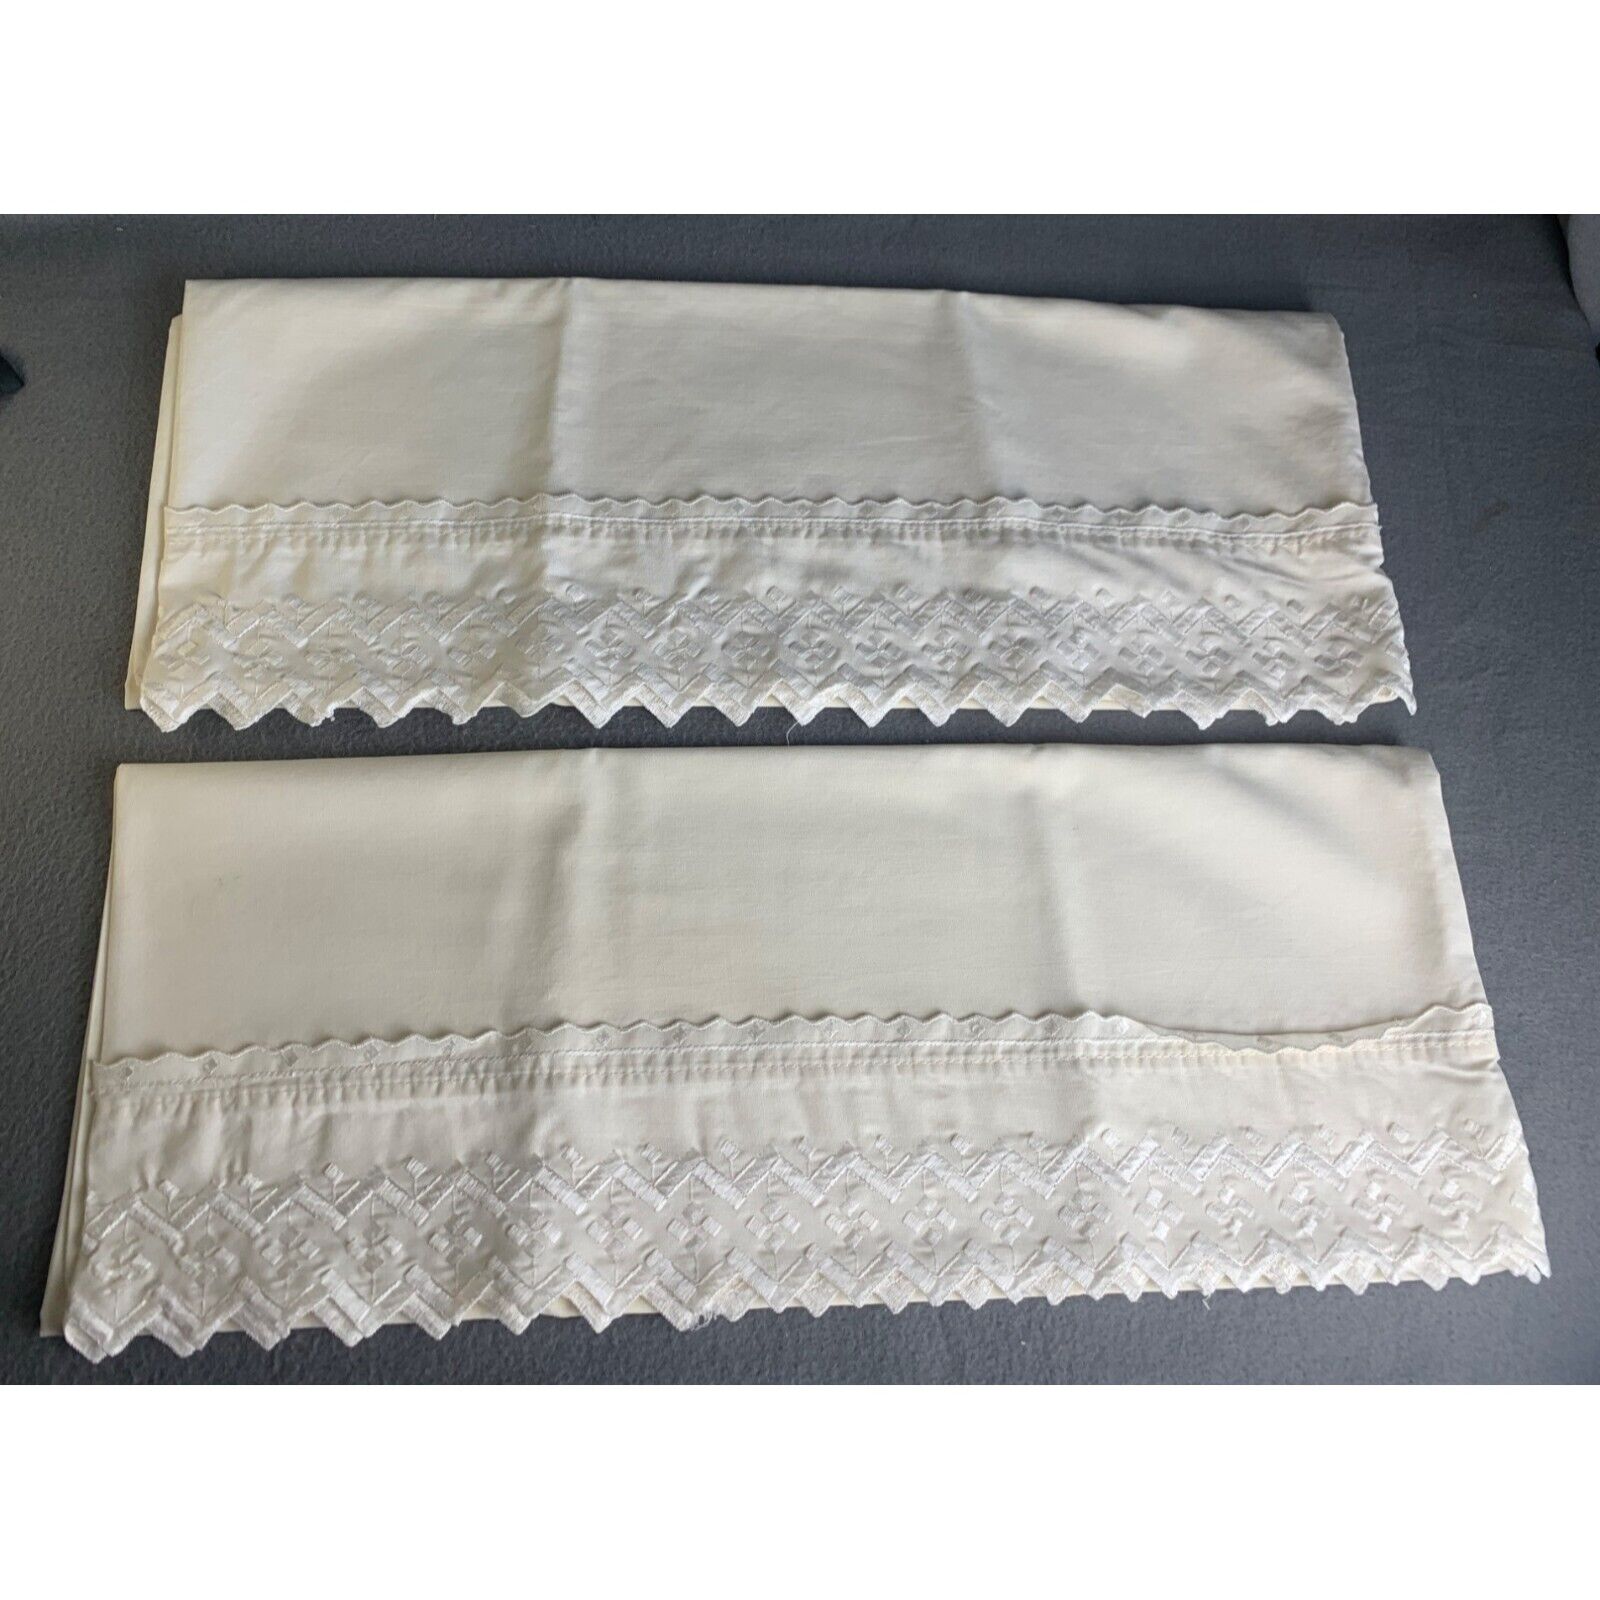 Set of 2 Vintage Pillowcases with Embroidered Lace Trim Cotton Standard Size Bed